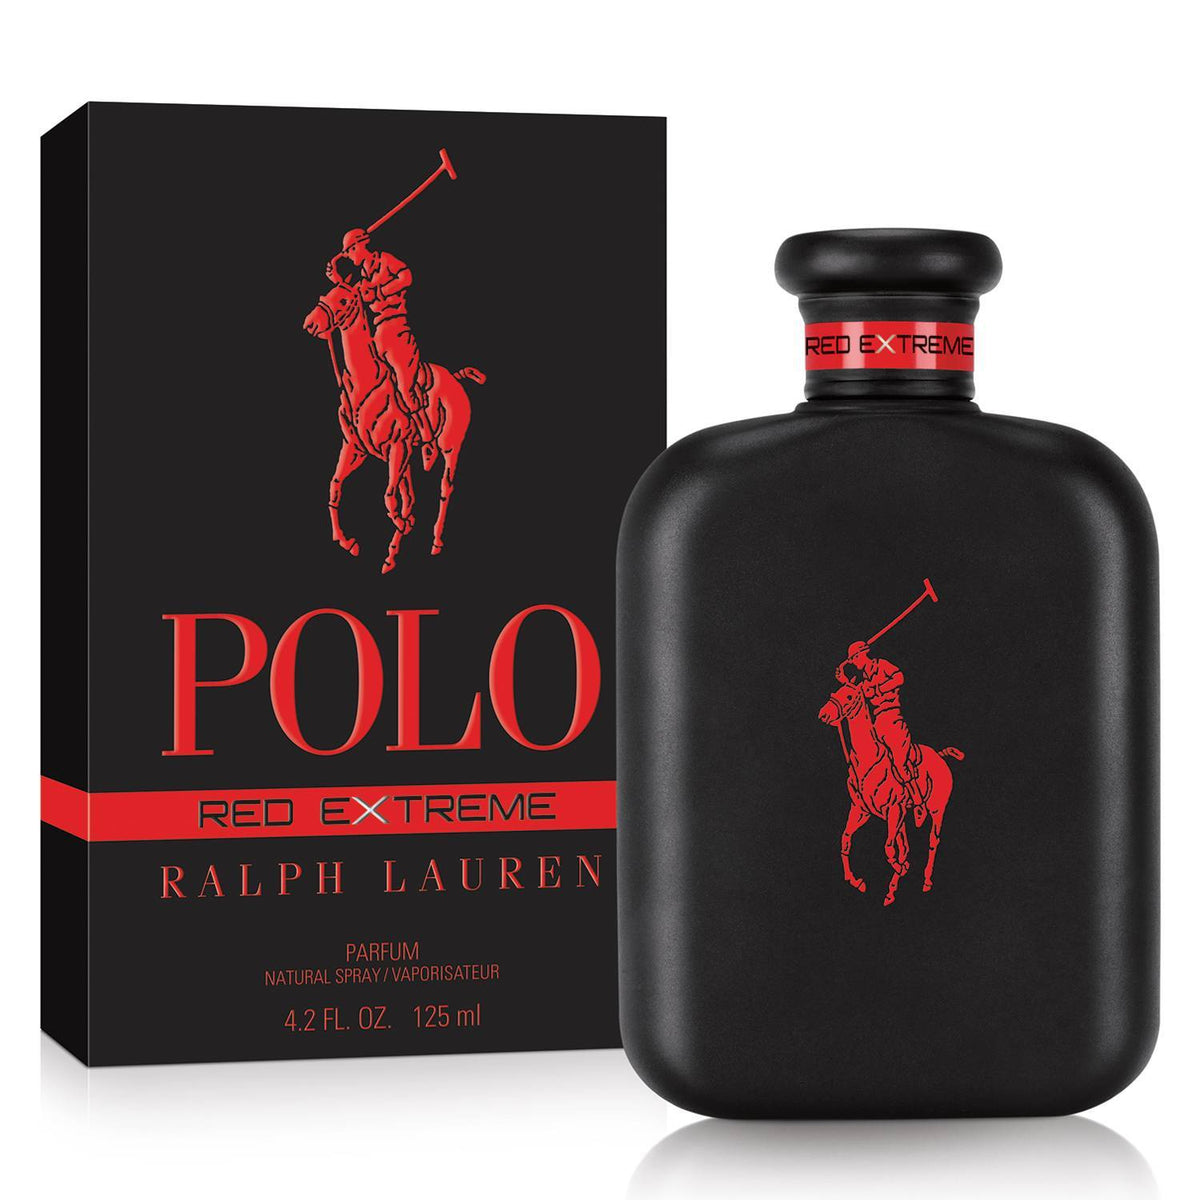 Polo Red Extreme EDP 125ML Hombre Ralph Lauren